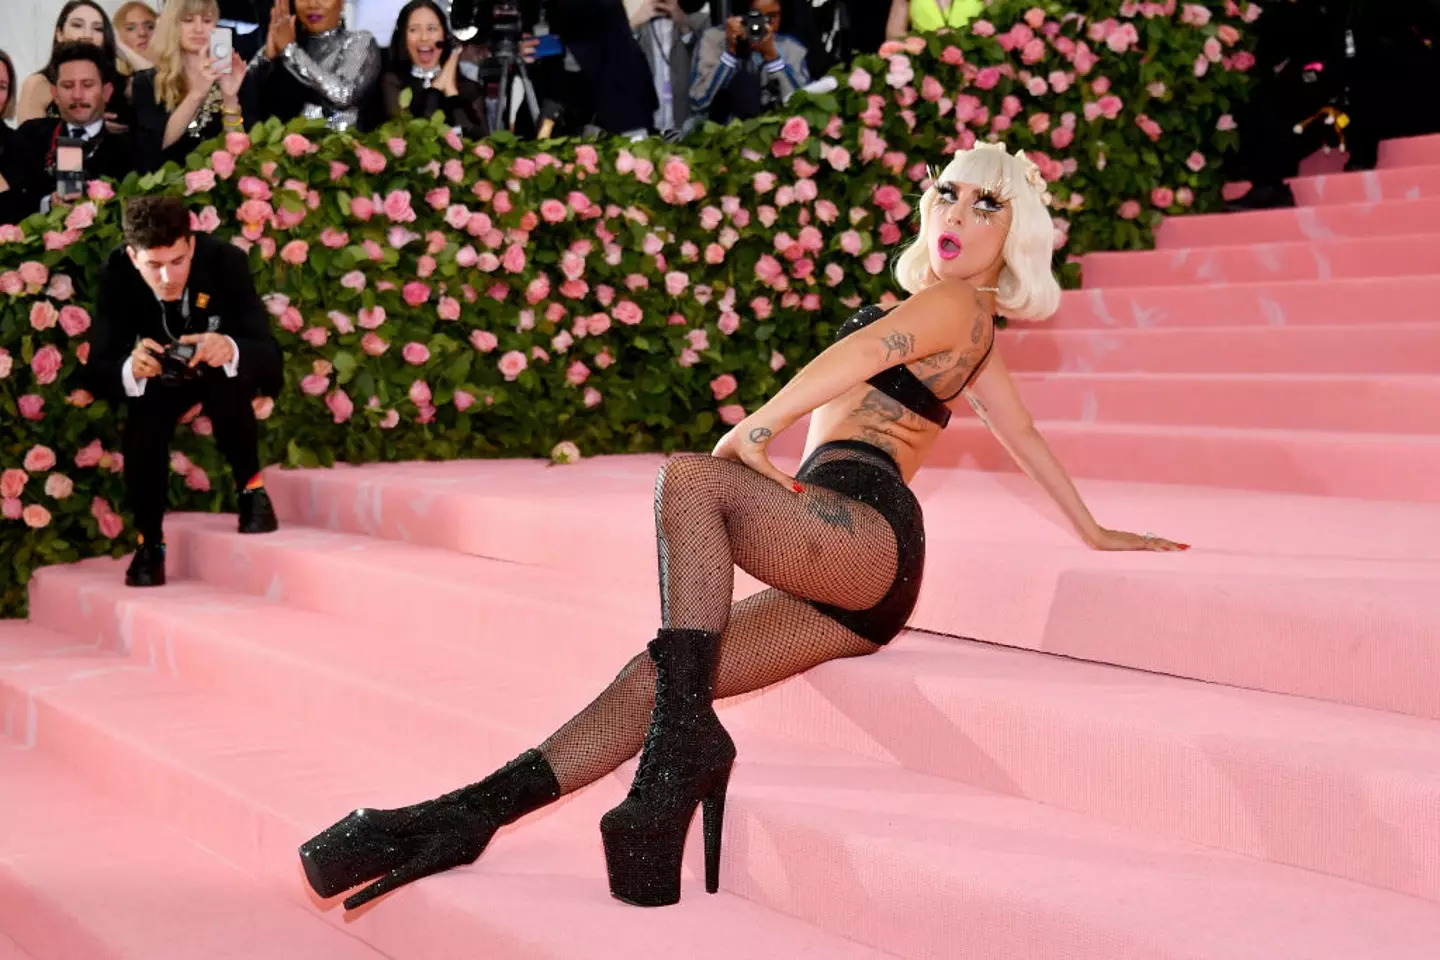 Lady Gaga showing off her fourth and final outfit change at the 2019 Met Gala. (Dia Dipasupil/FilmMagic)